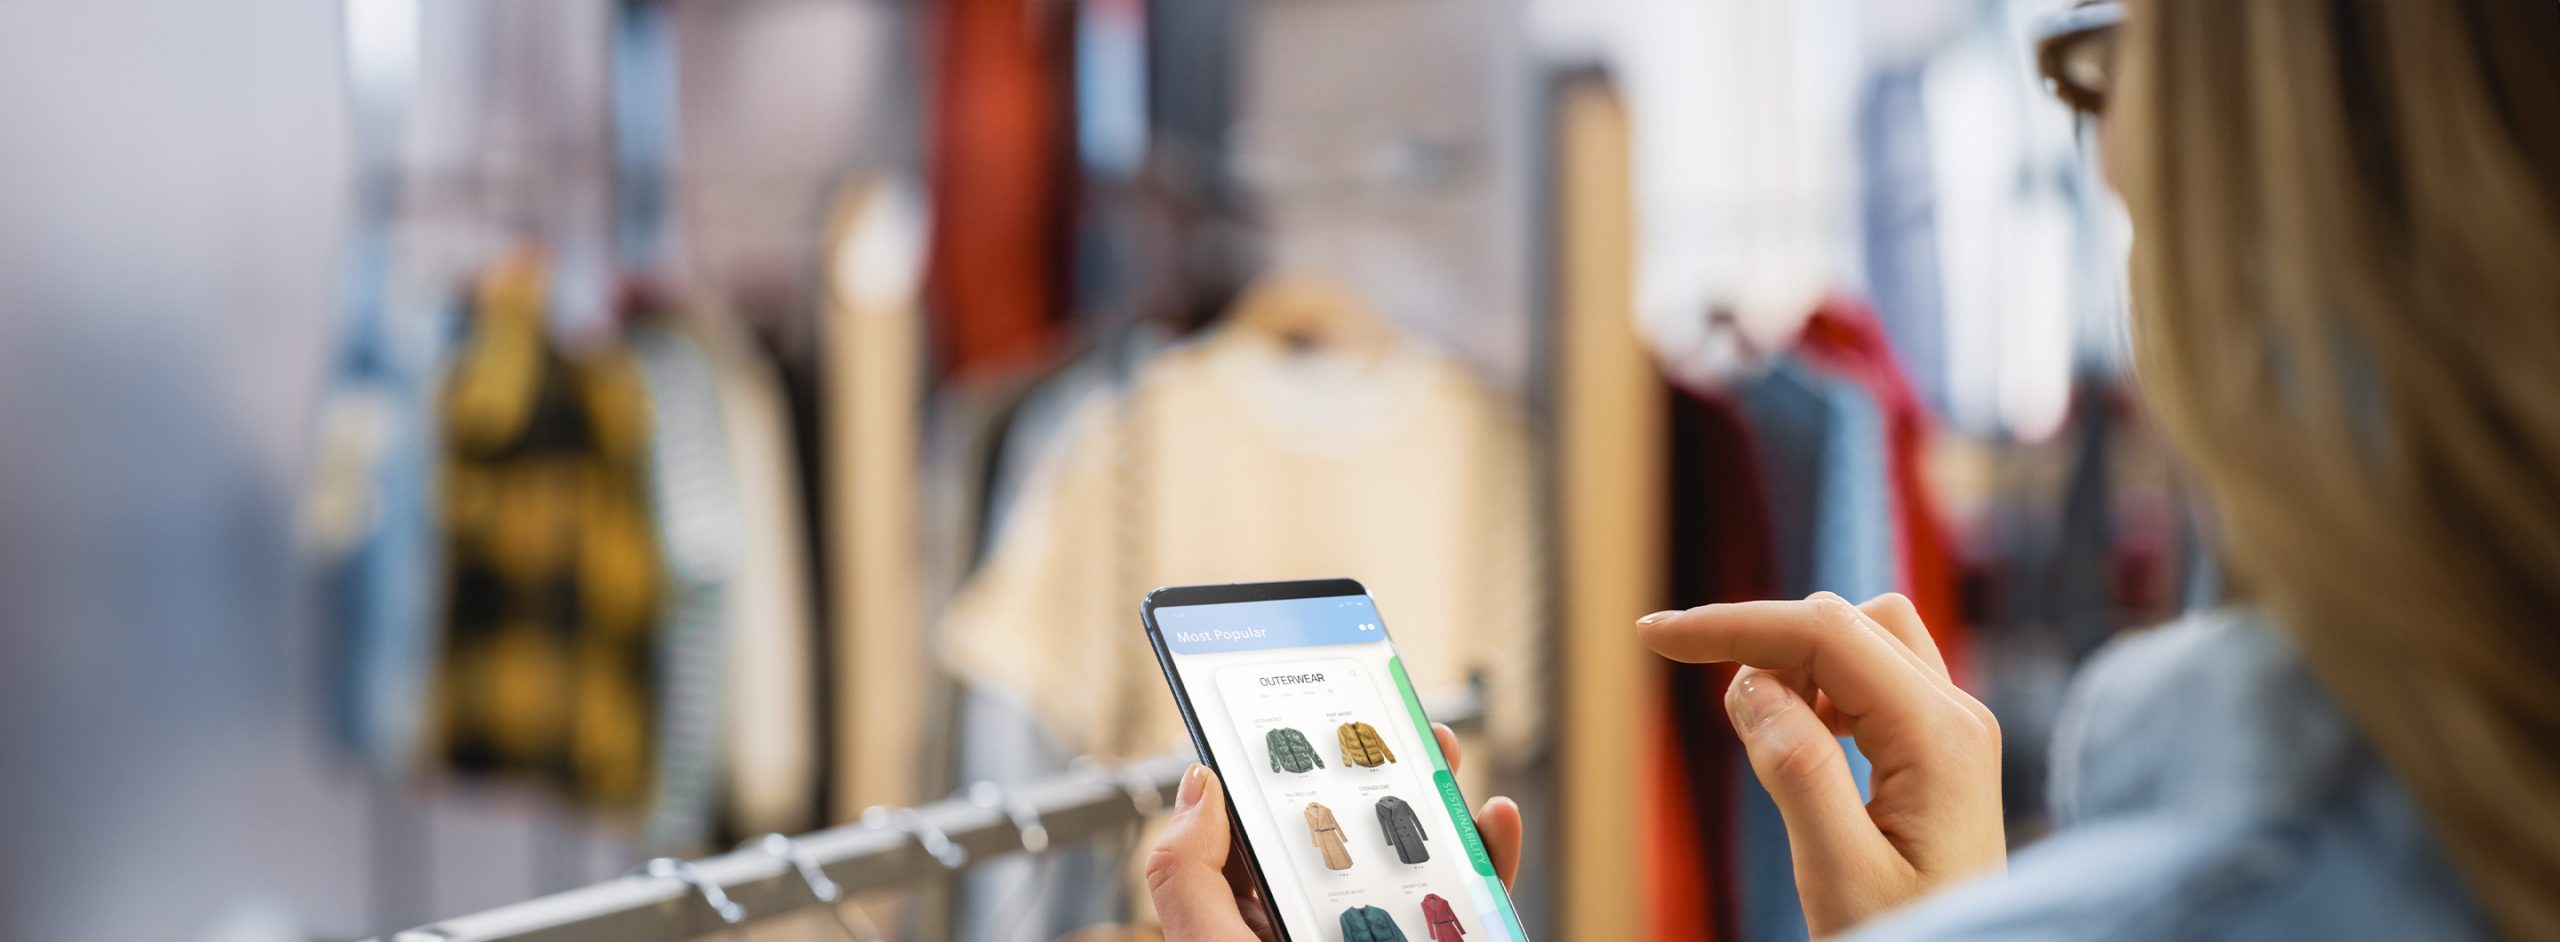 How can Unified Commerce Improve Digital Experience in Retail?